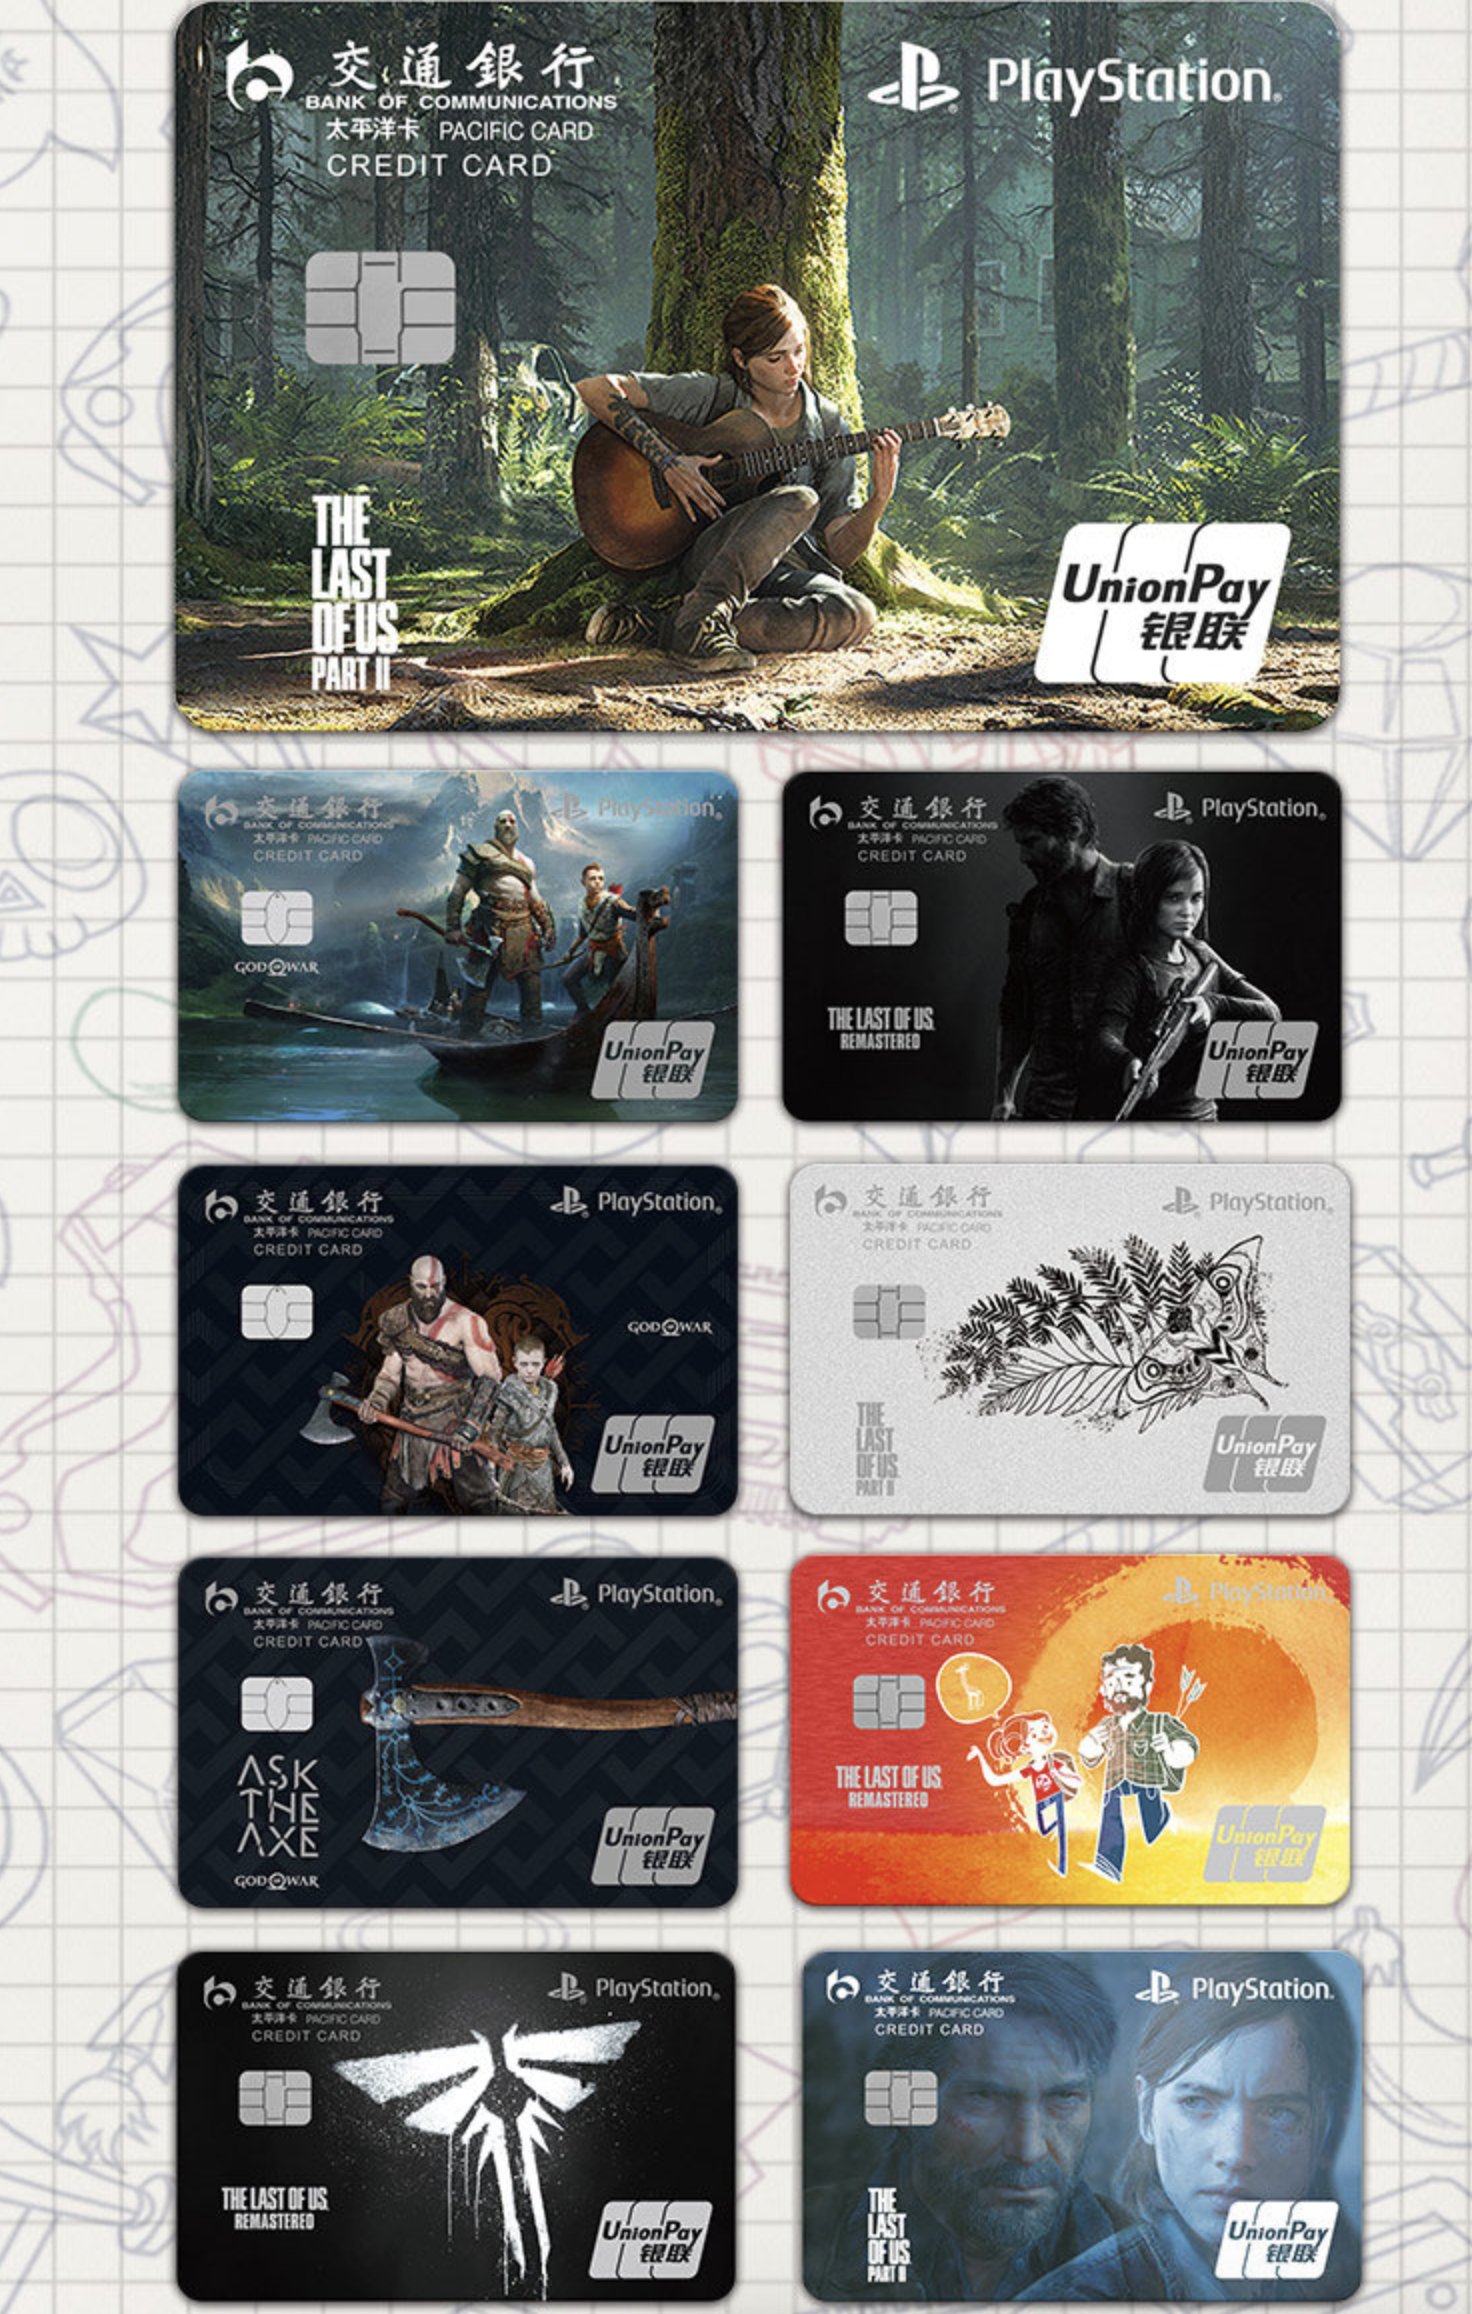 Daniel Ahmad on Twitter: "Sony is doing some more PlayStation branded credit for the Mainland market, in collaboration with the Bank of Communications. The card design is based on PlayStation